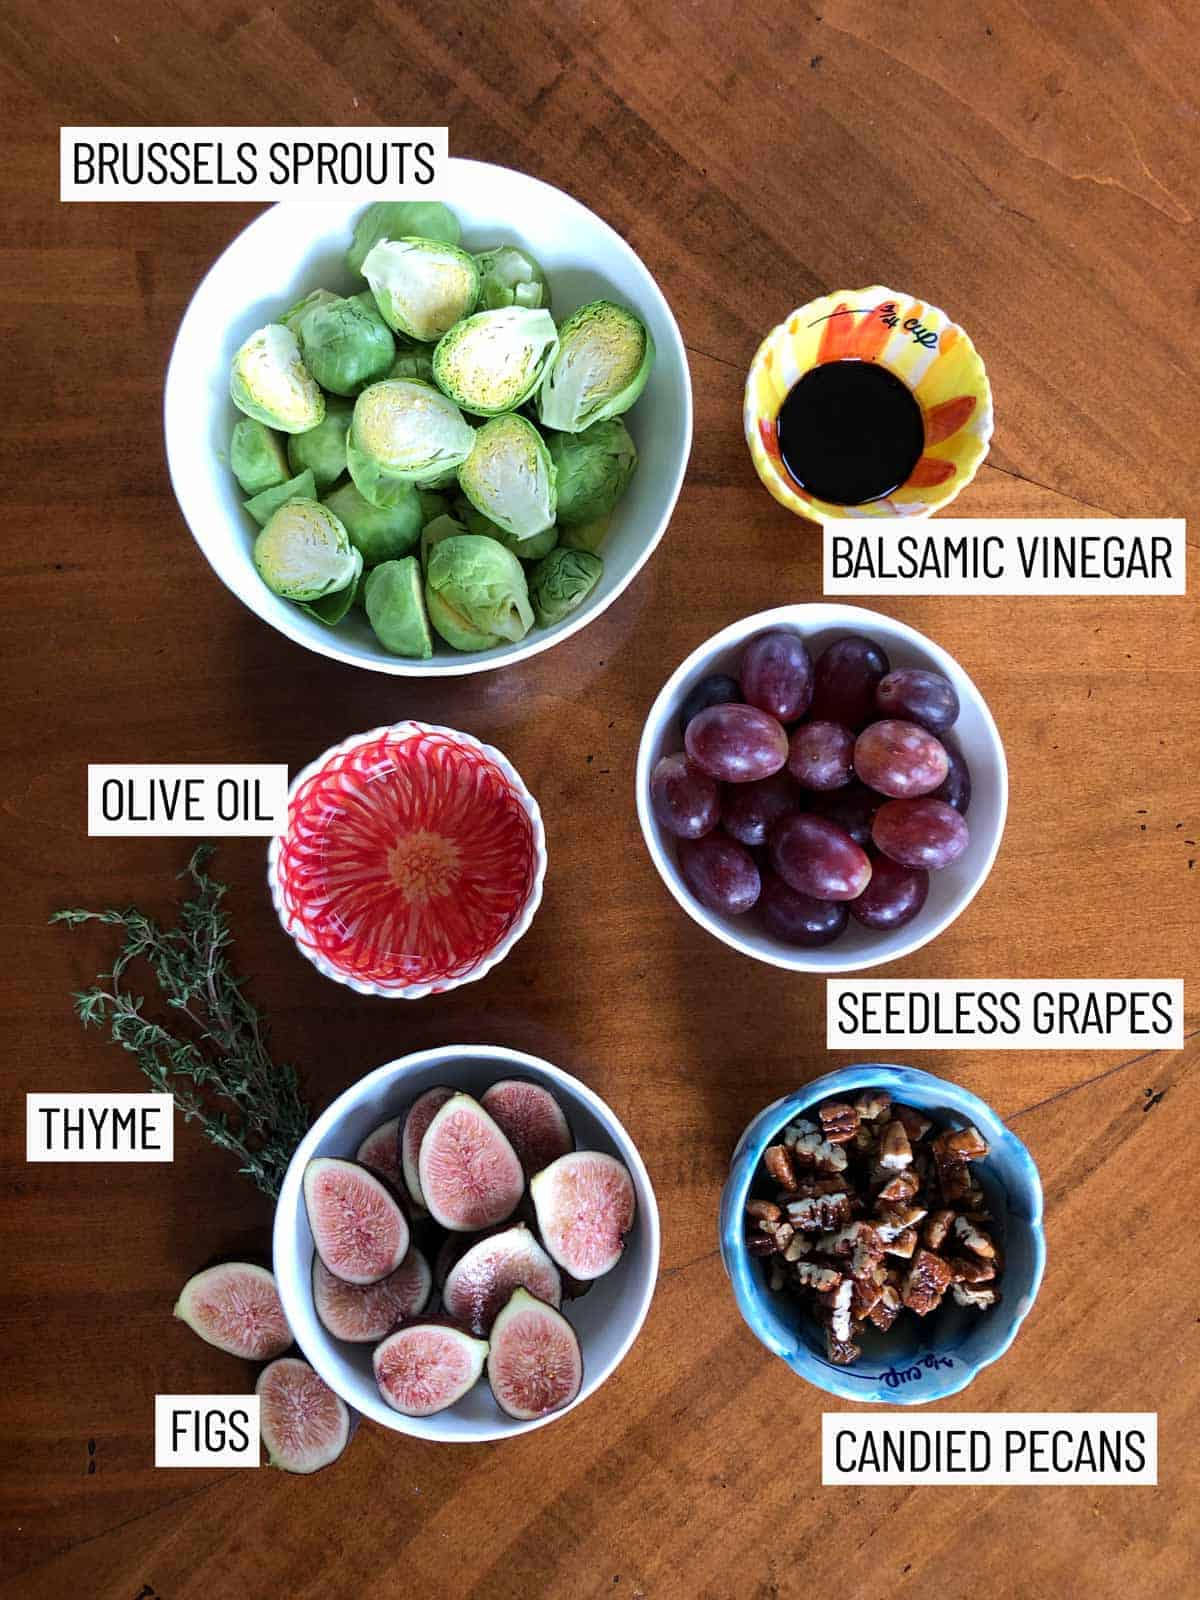 Overhead image of ingredients for Oven roasted balsamic brussels sprouts recipe including Brussels sprouts, balsamic vinegar, olive oil, seedless grapes, thyme, figs, and candied pecans.